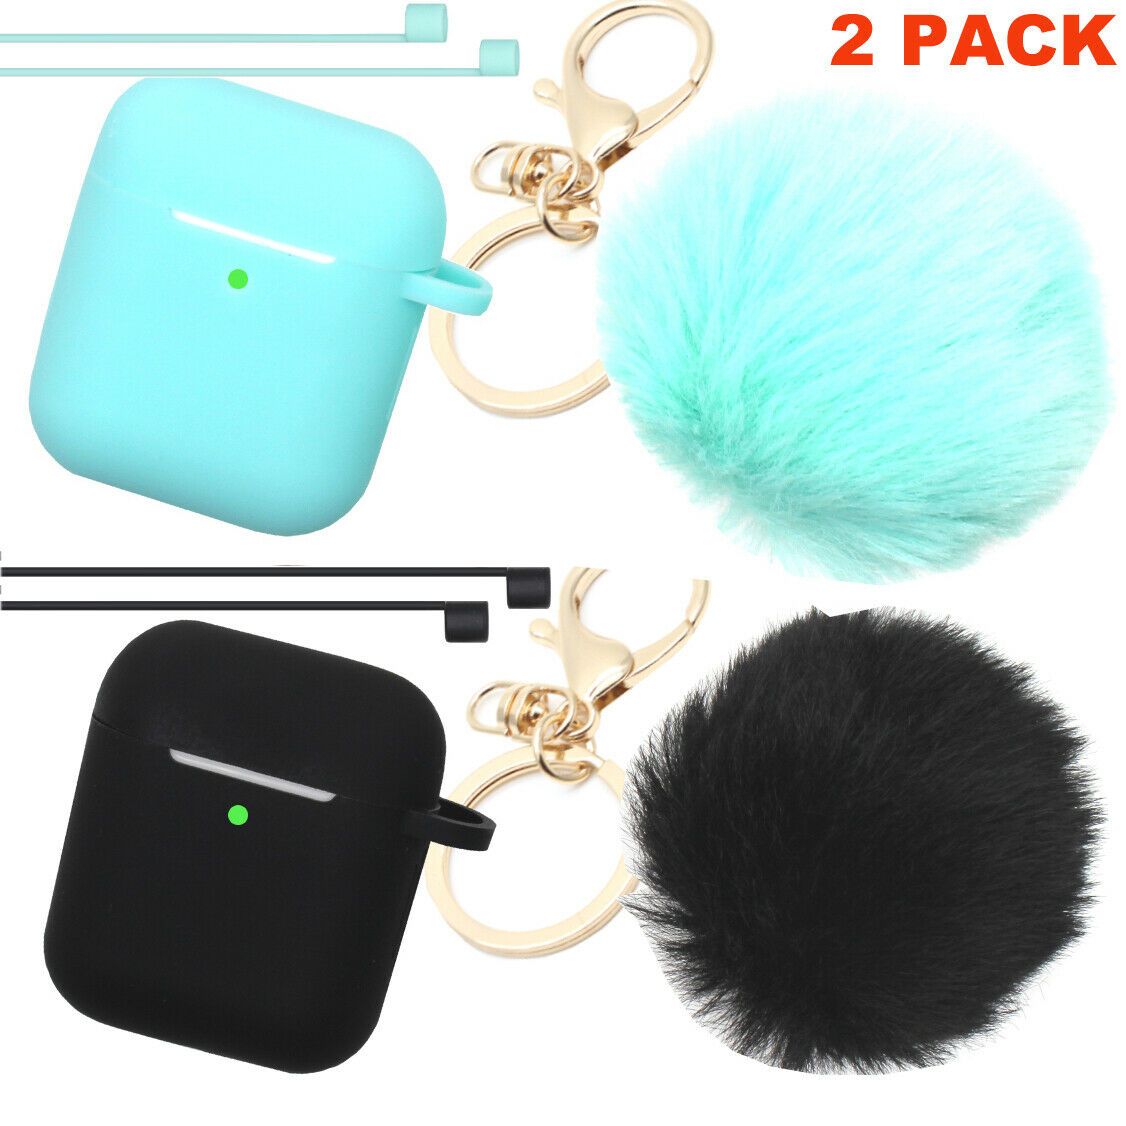 Cute Airpods Silicone Case Cover w/Fur Ball Keychain Strap for Apple Airpods 1/2 ervin.accessories Mint+Black(2 Pack) 